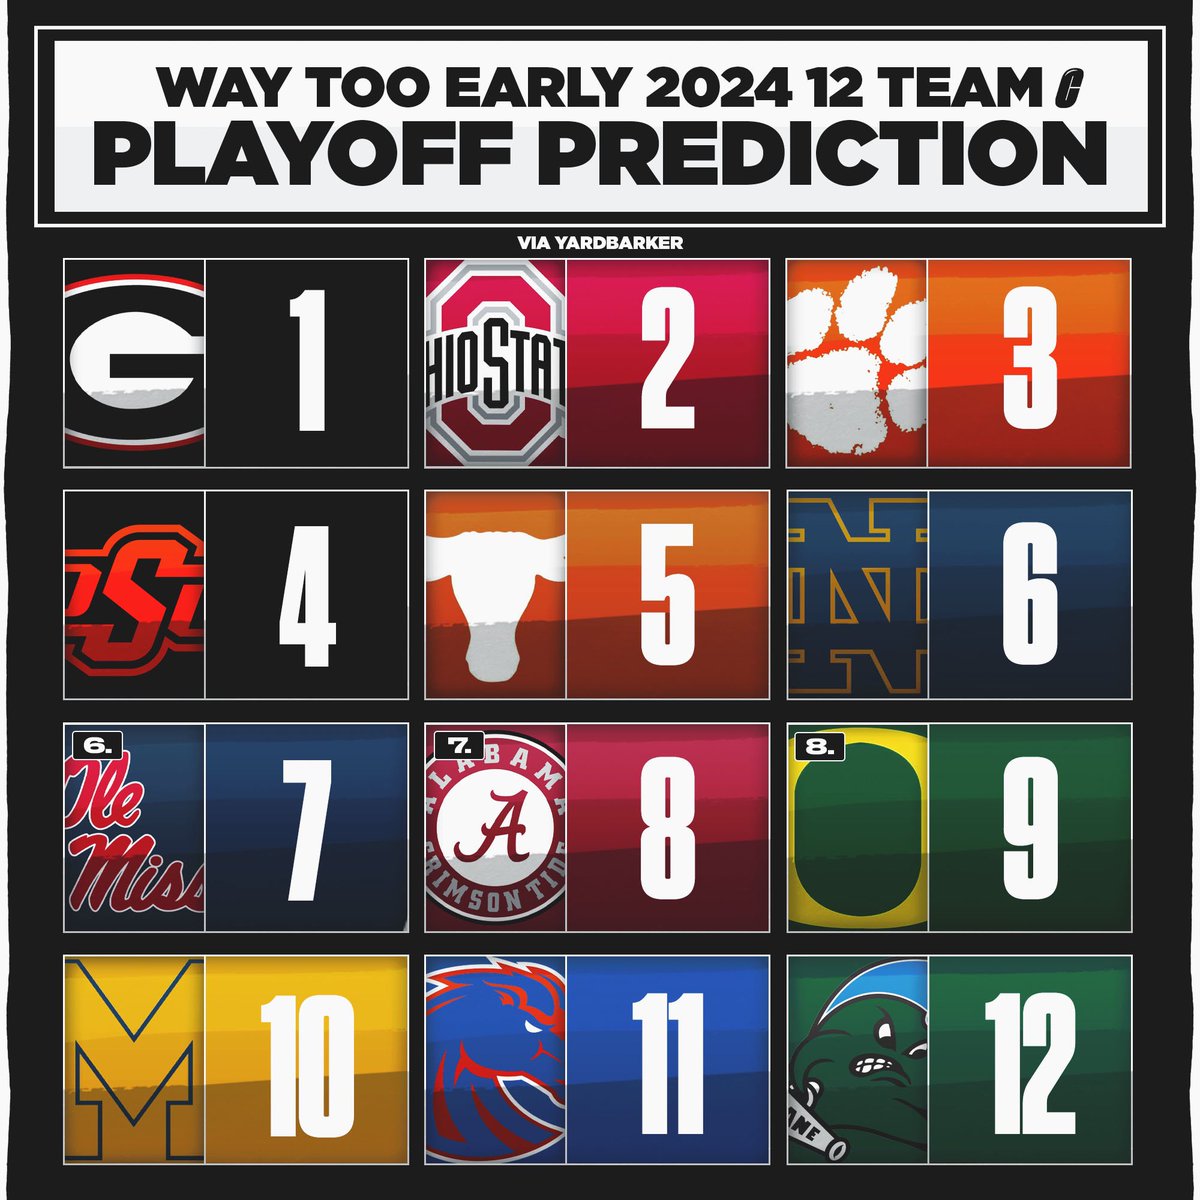 Way too early 12 team playoff prediction for this upcoming college football season. 👀